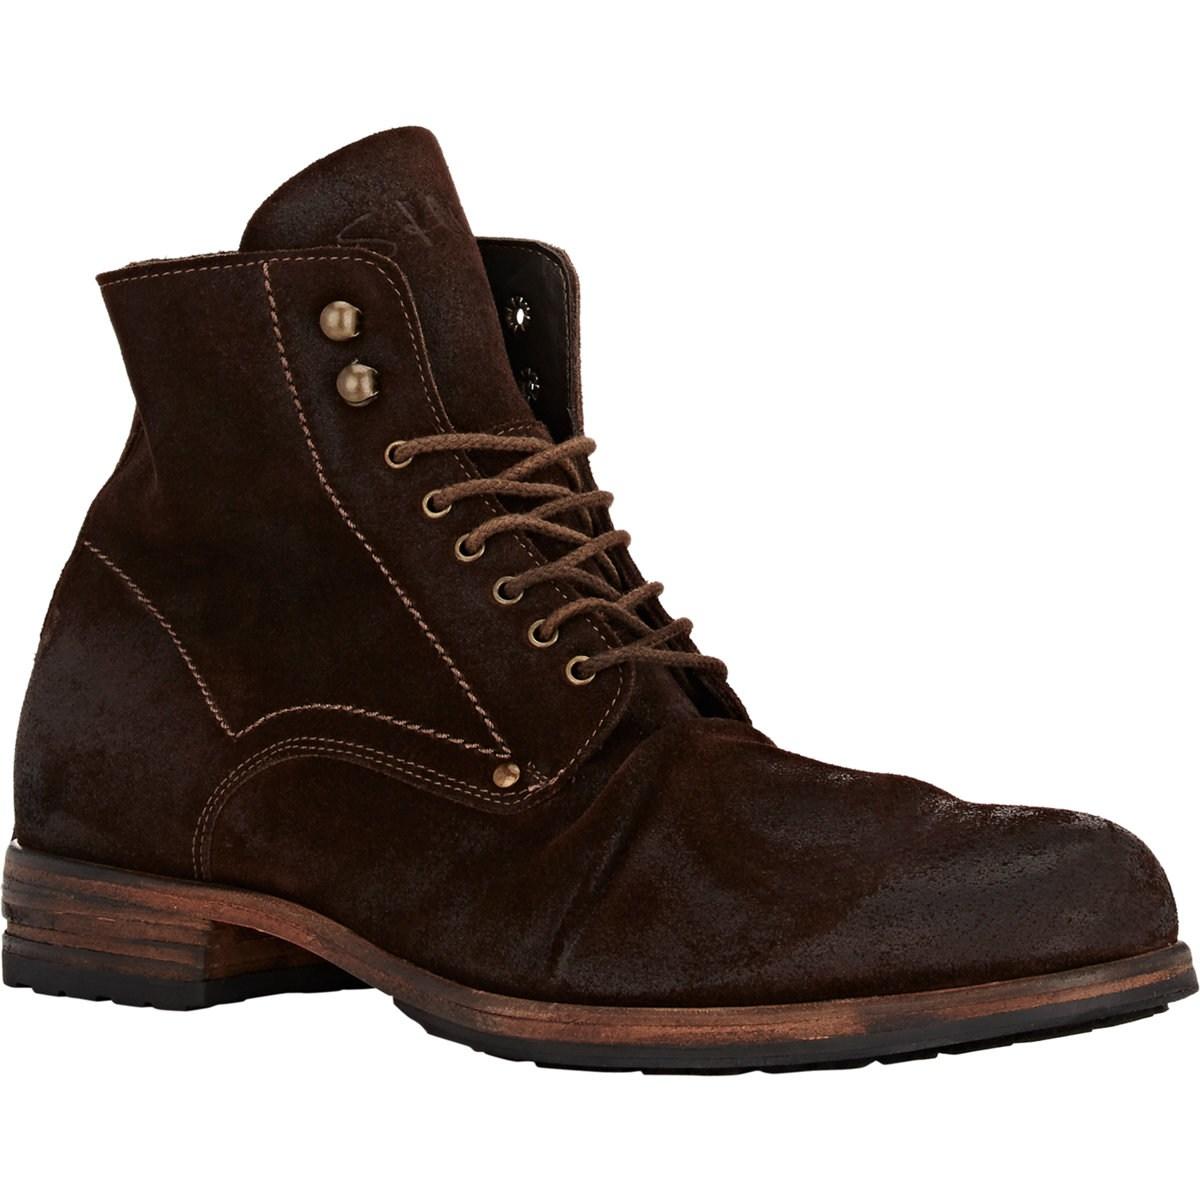 Shoto Suede Wrinkled-vamp Boots in Brown for Men - Lyst